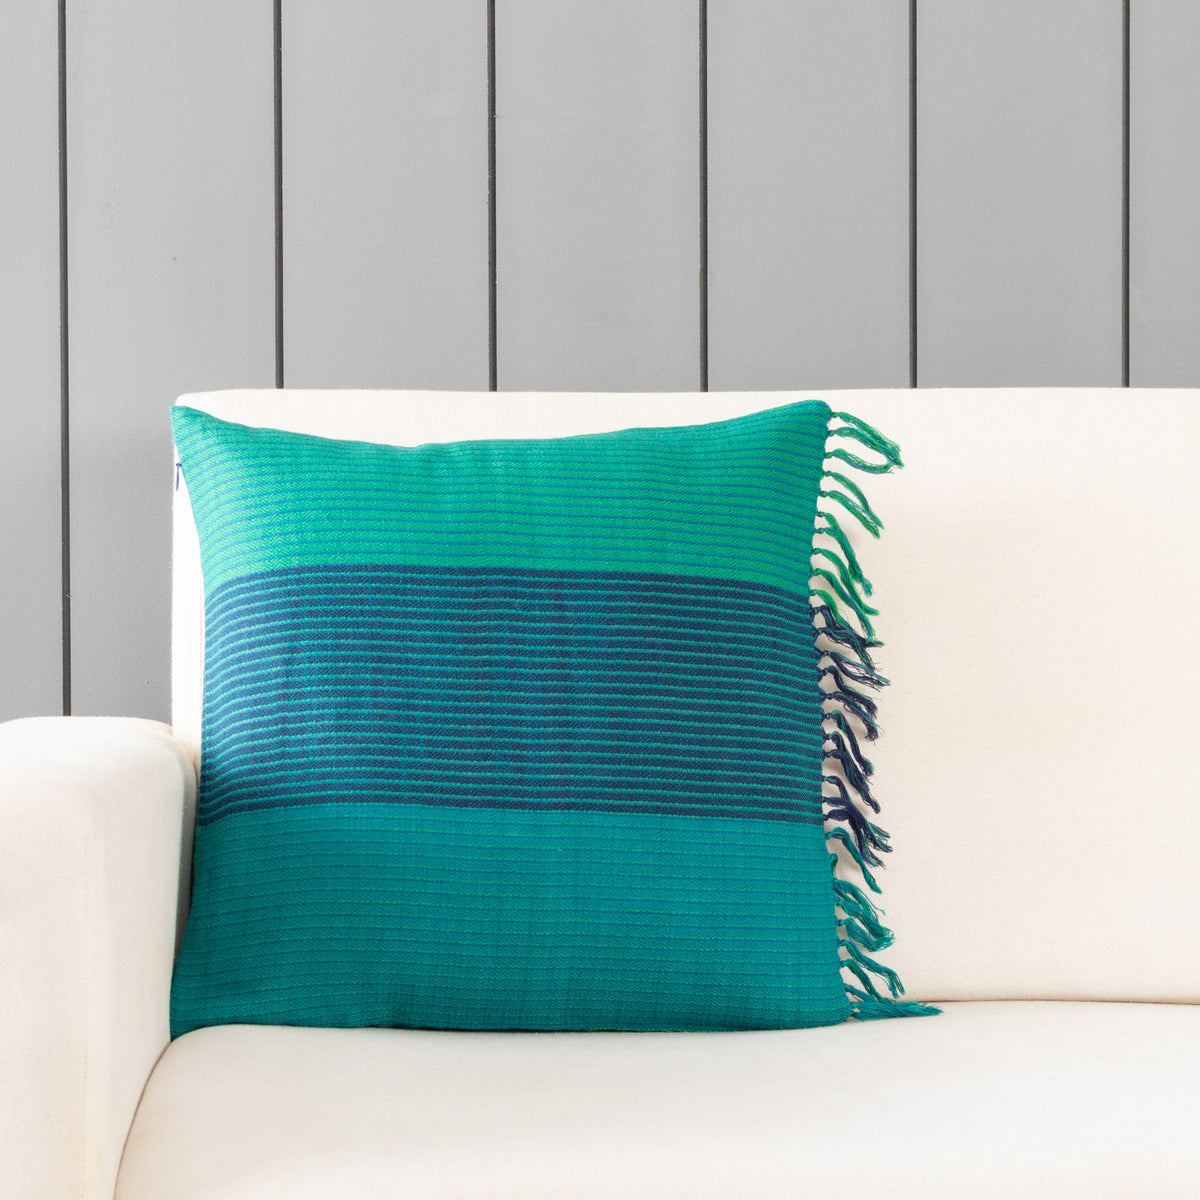 Handwoven Upcycled Turquoise & Blue Wool Cushion Cover - 16x16